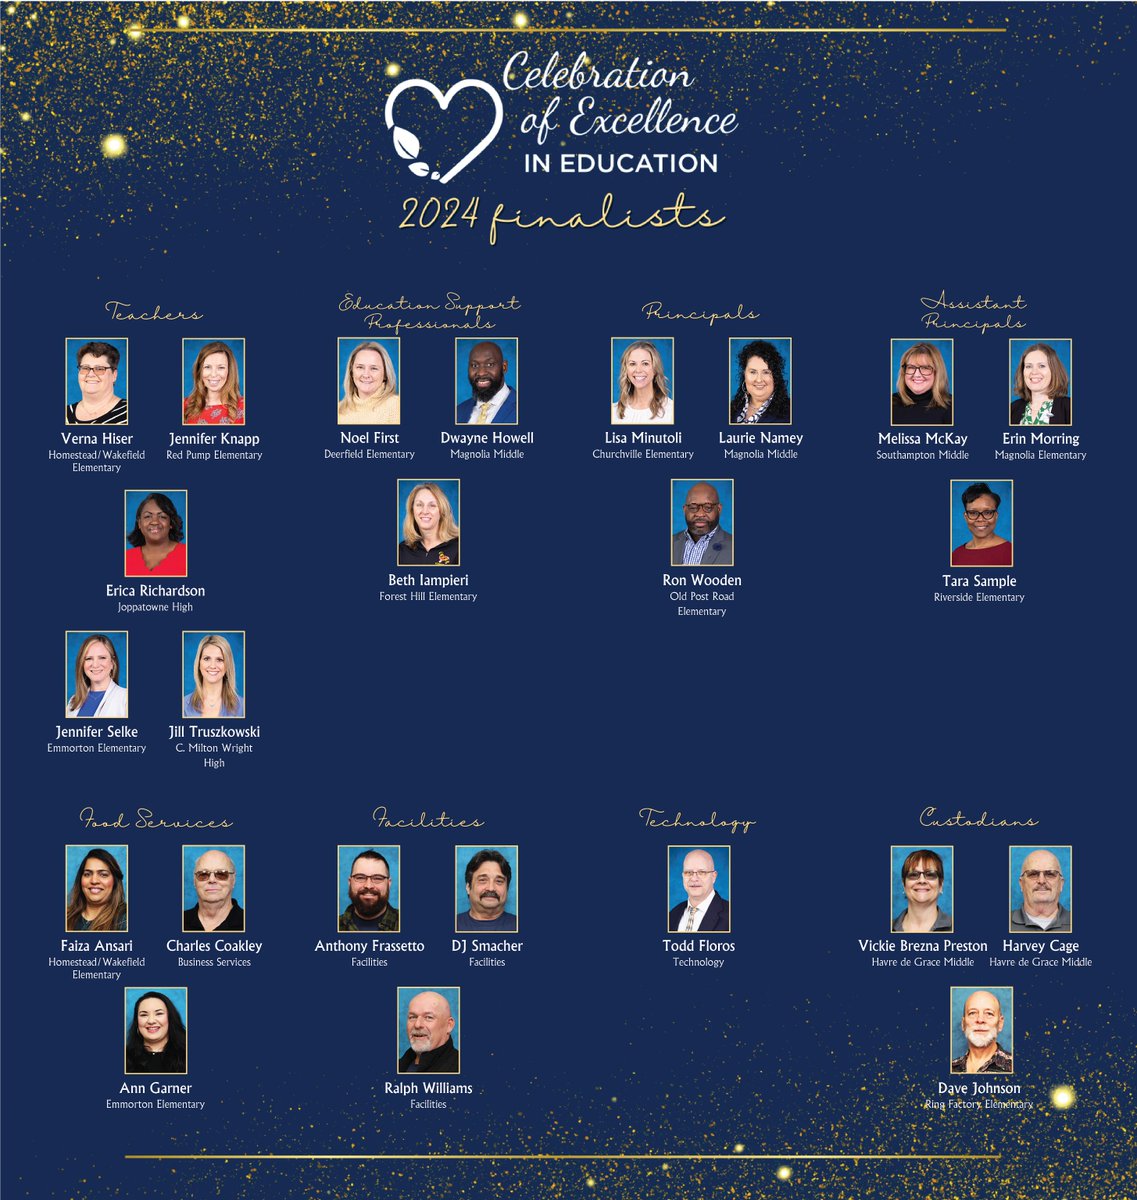 It's almost here! Next week we announce all our winners at the Celebration of Excellence in Education, including out 2024 Teacher of the Year! Leave a good luck message to all our finalists, and join us next week when we announce the winners.